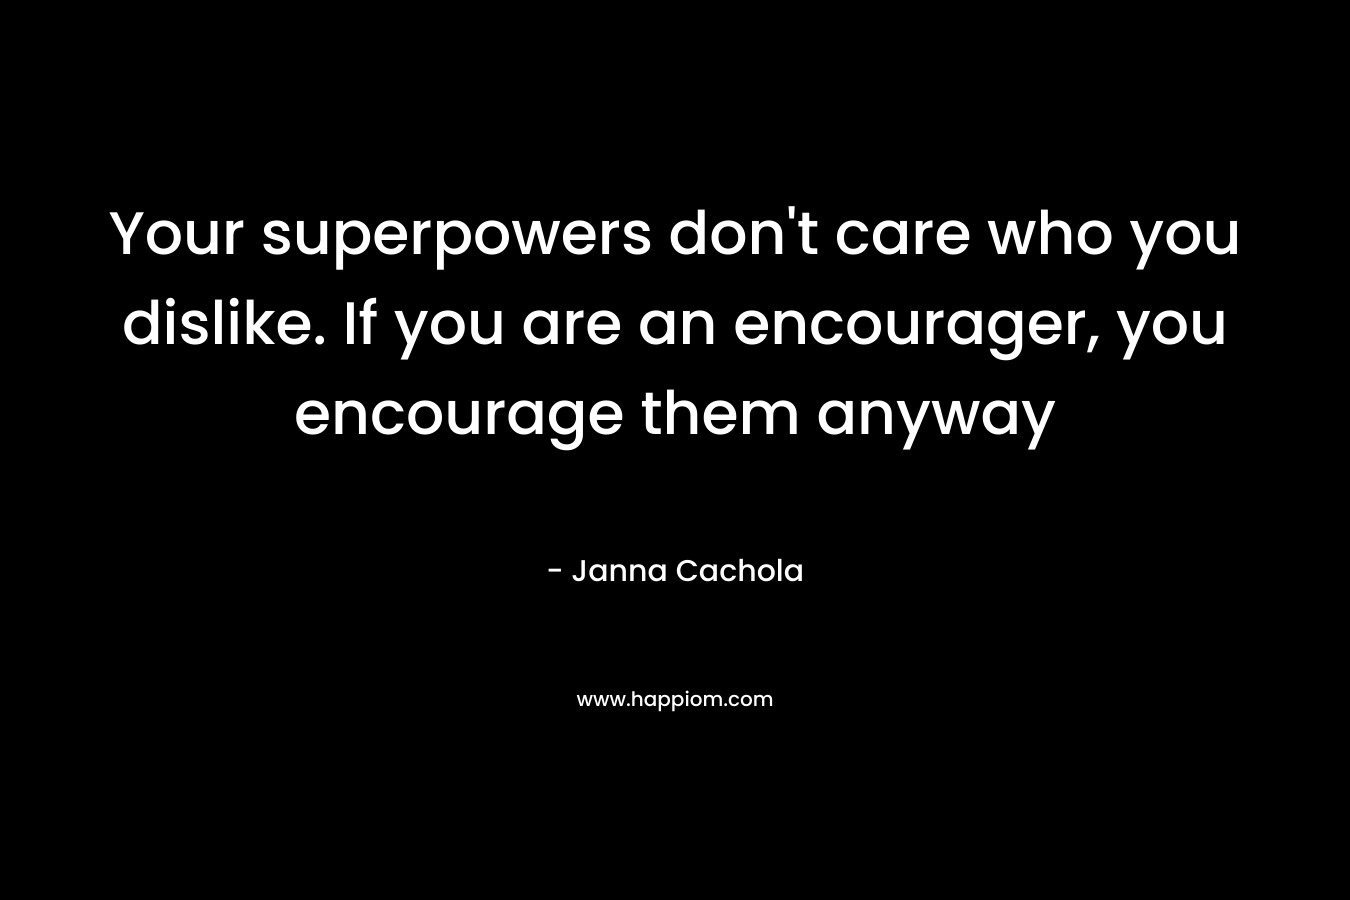 Your superpowers don't care who you dislike. If you are an encourager, you encourage them anyway